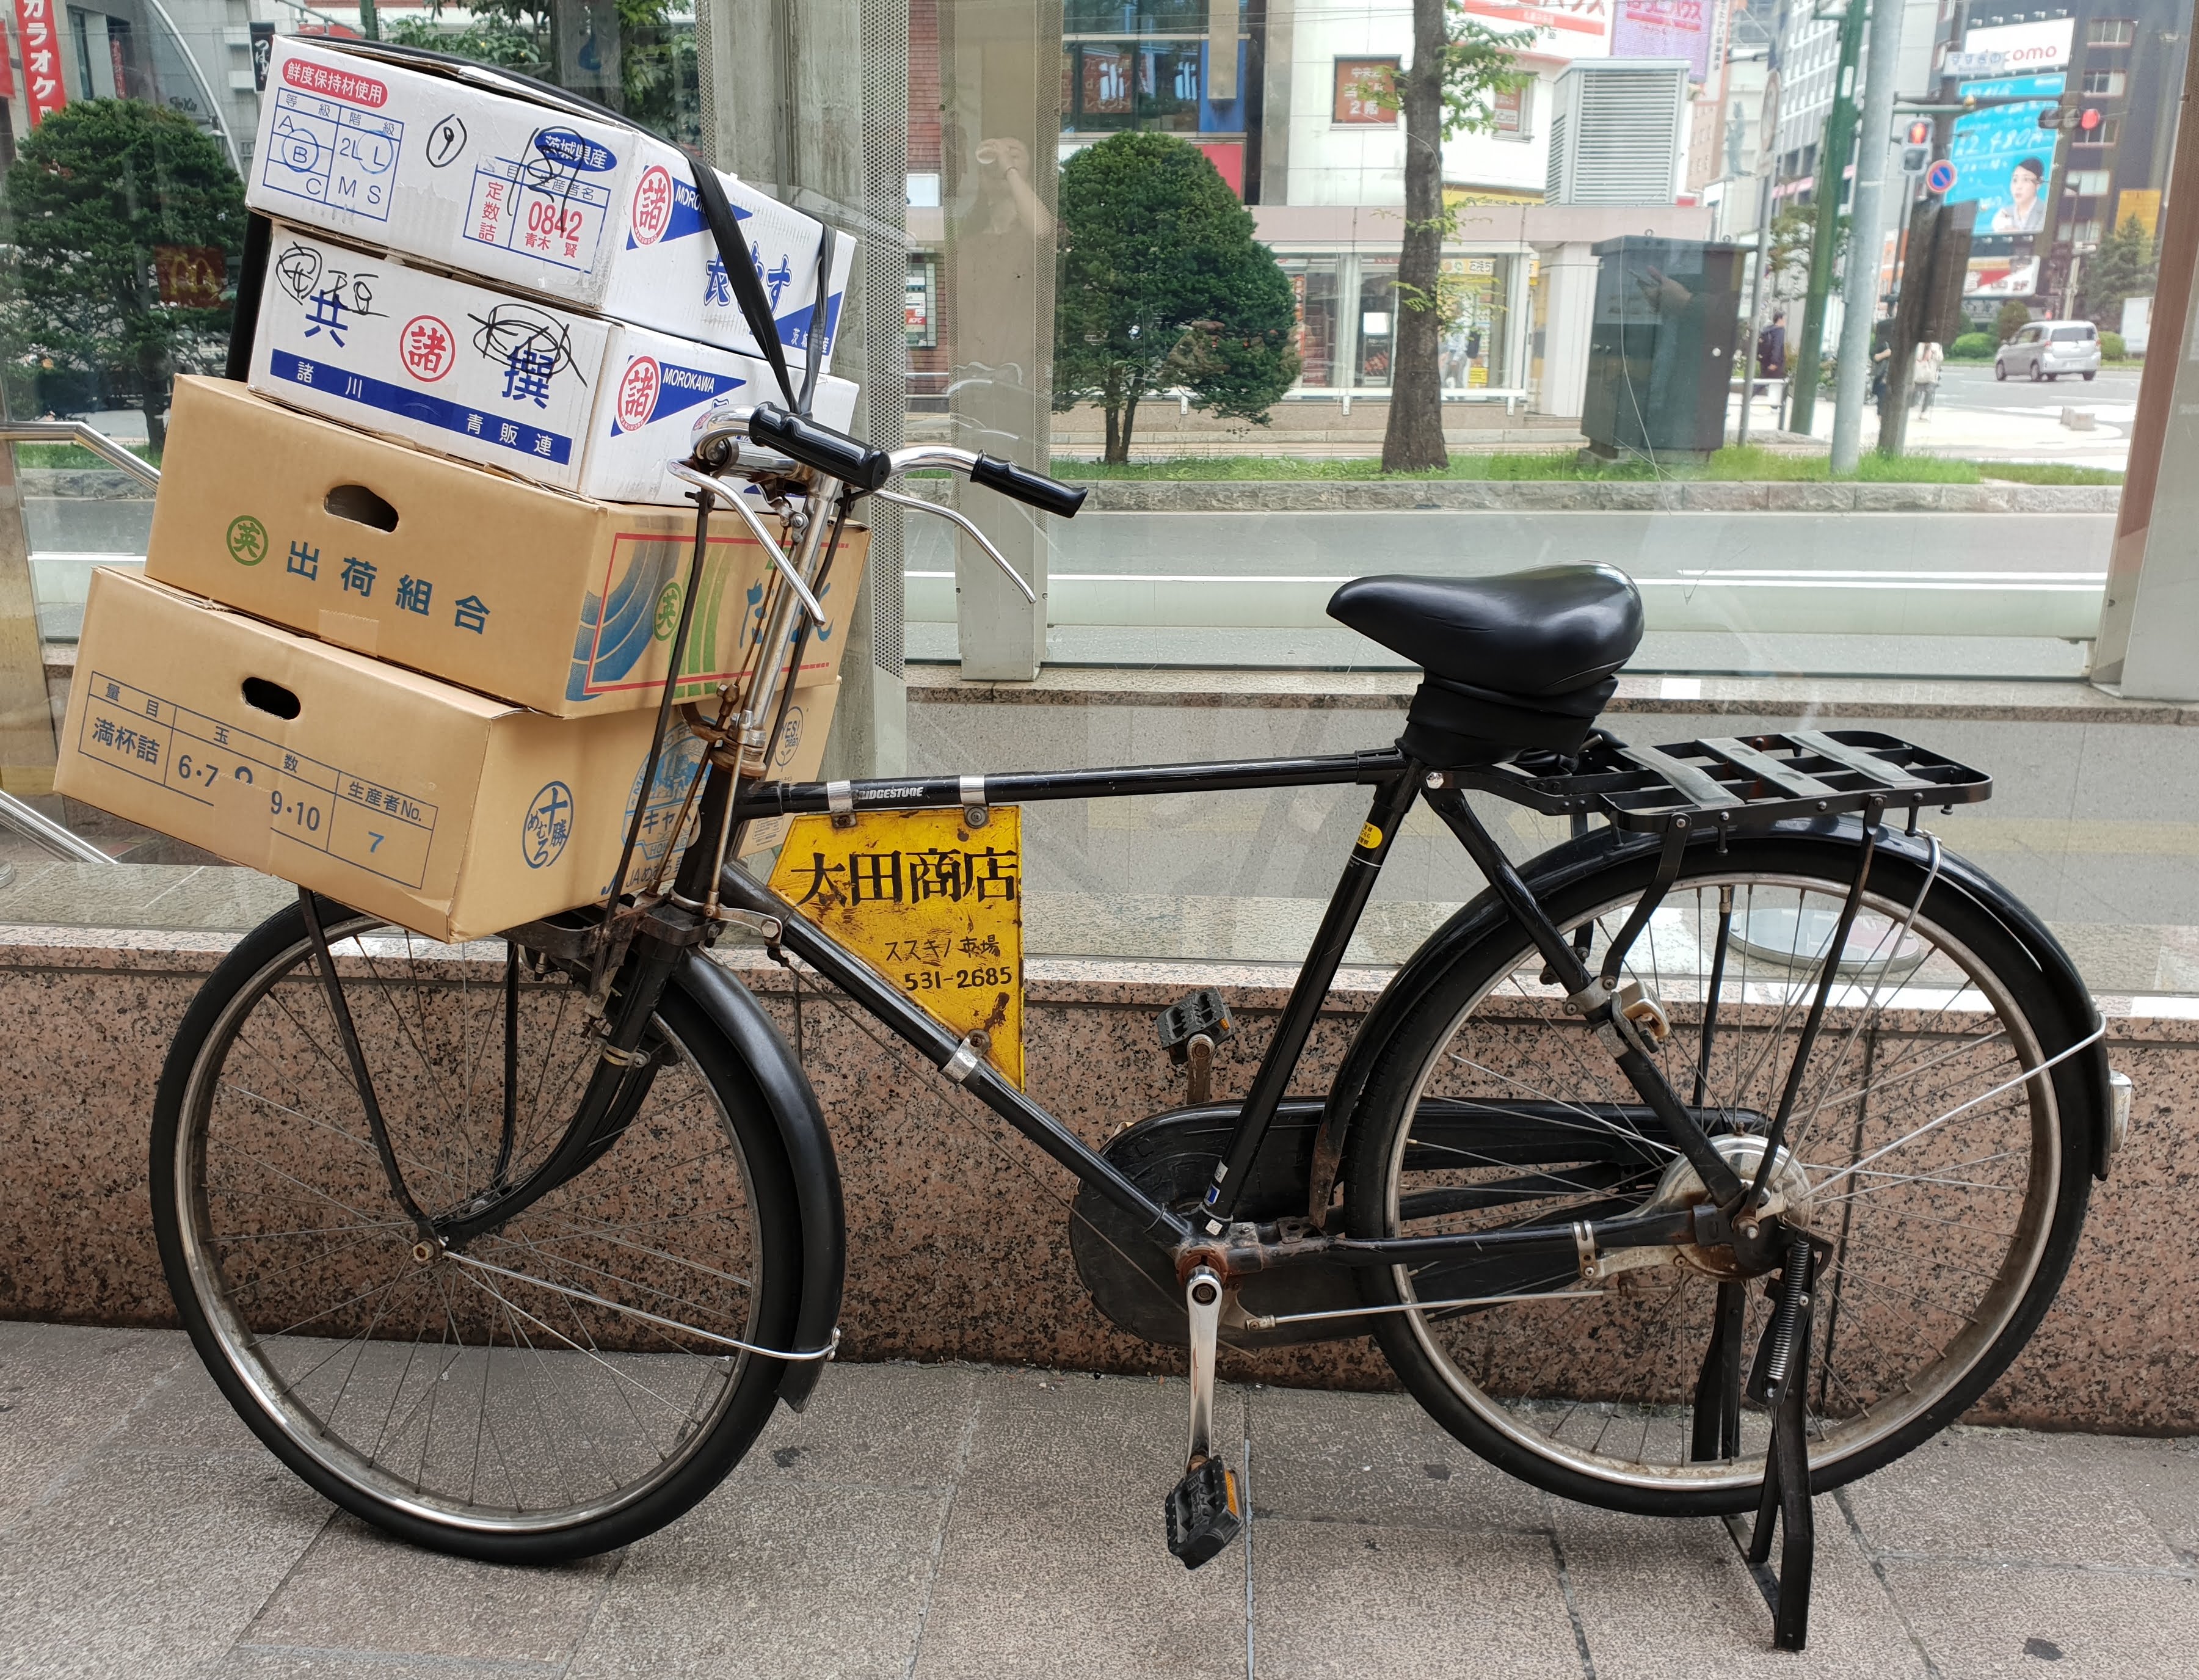 Why Japan should be on the bucket list of every bike touring fan